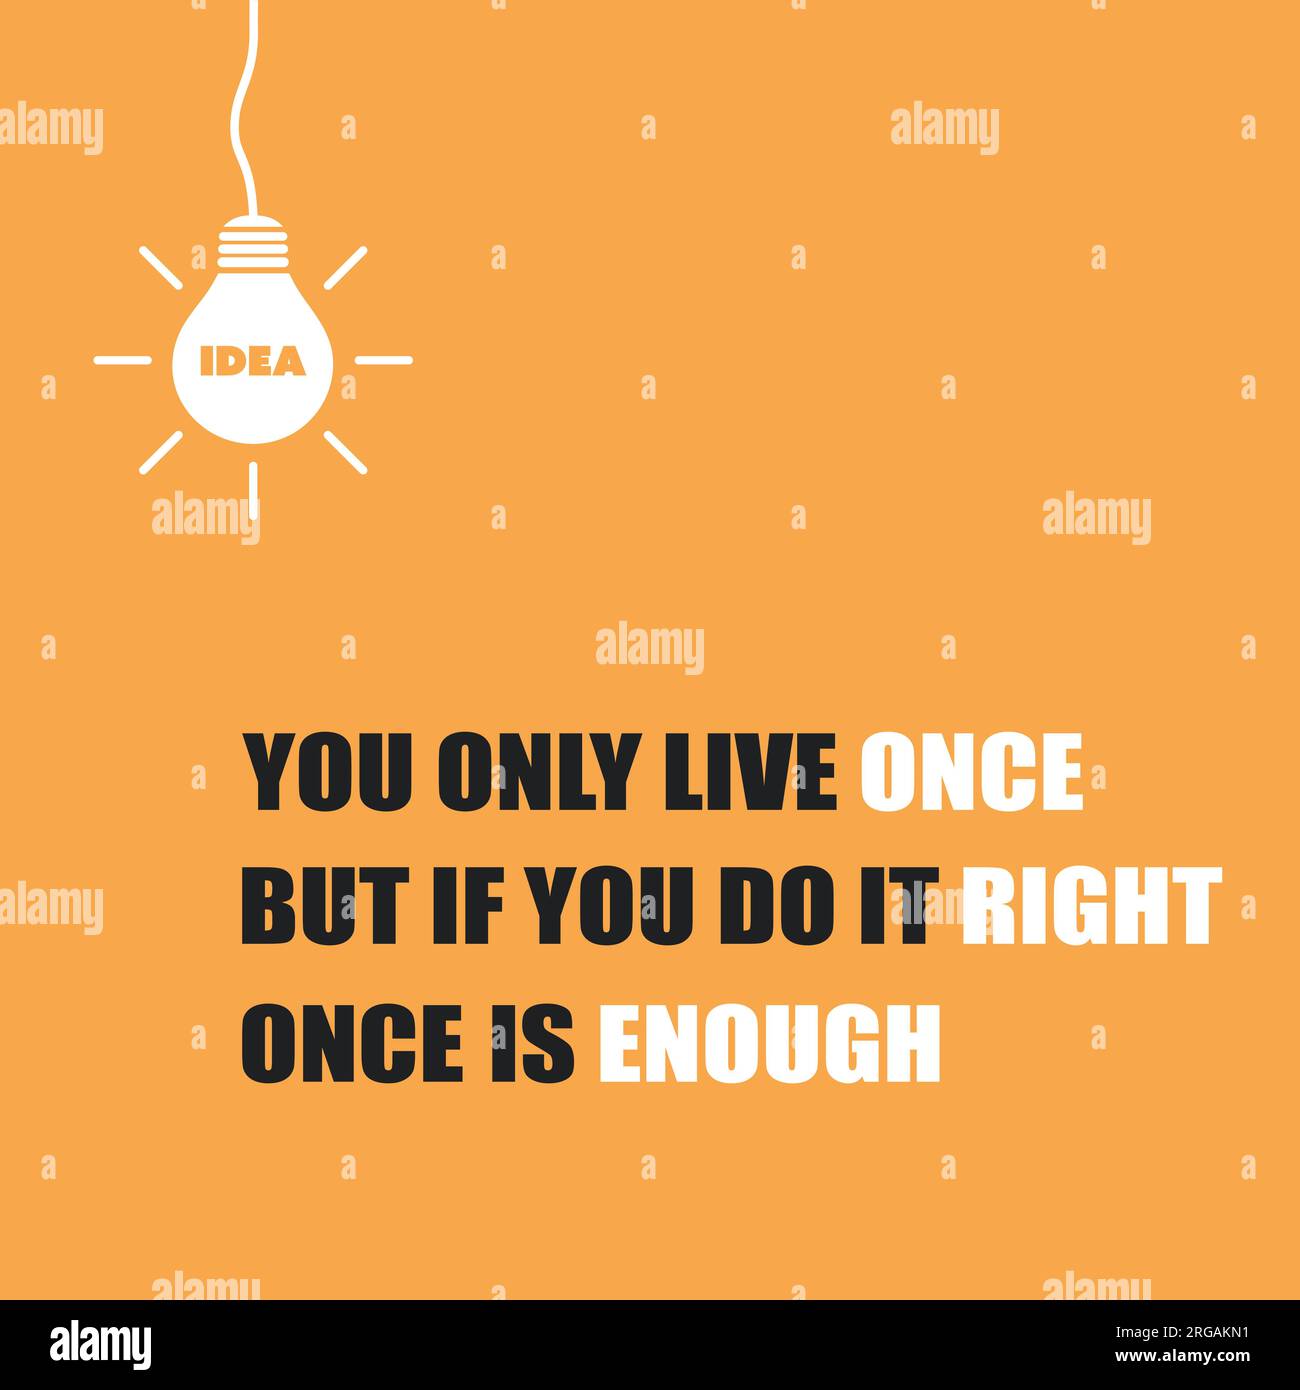 You Only Live Once, But If You Do It Right, Once is Enough - Inspirational Quote, Slogan, Saying On Orange Background Stock Vector